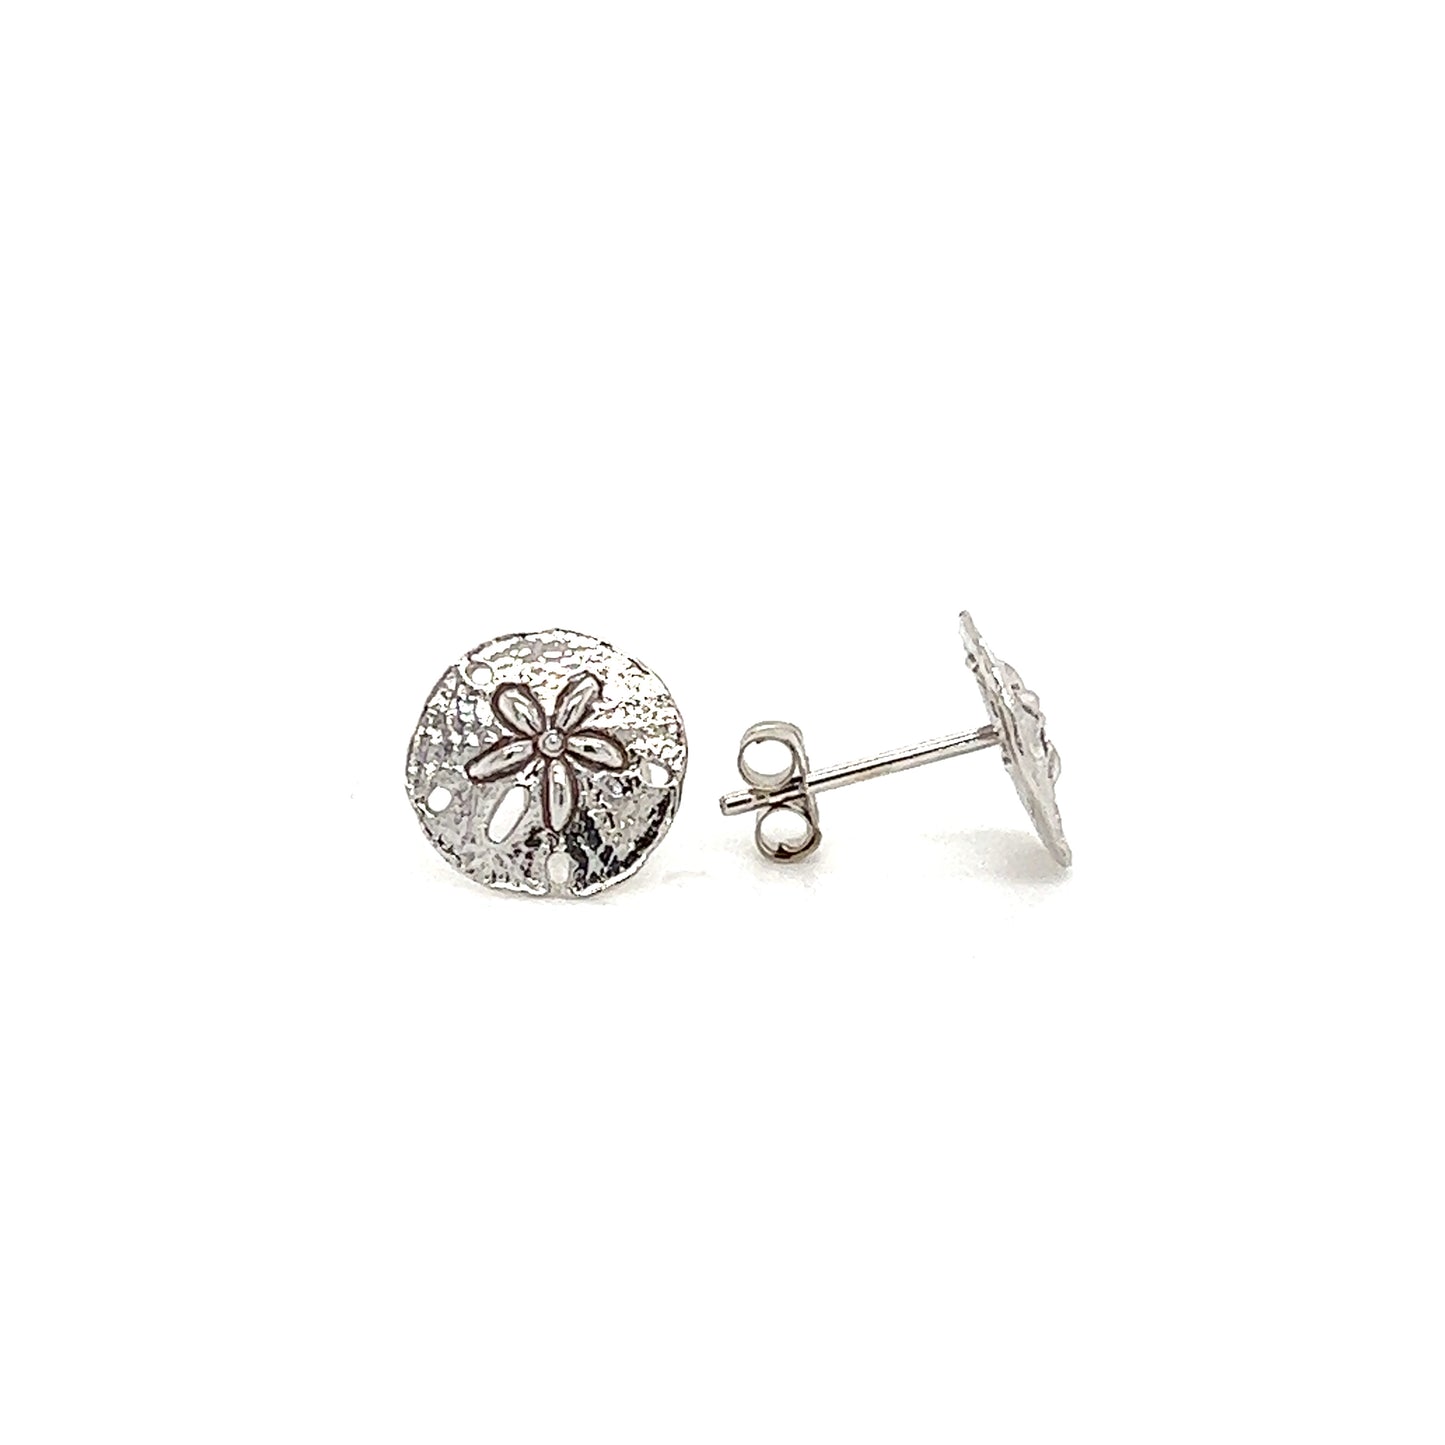 Sand Dollar Stud Earrings in 14K White Gold Front and Side View